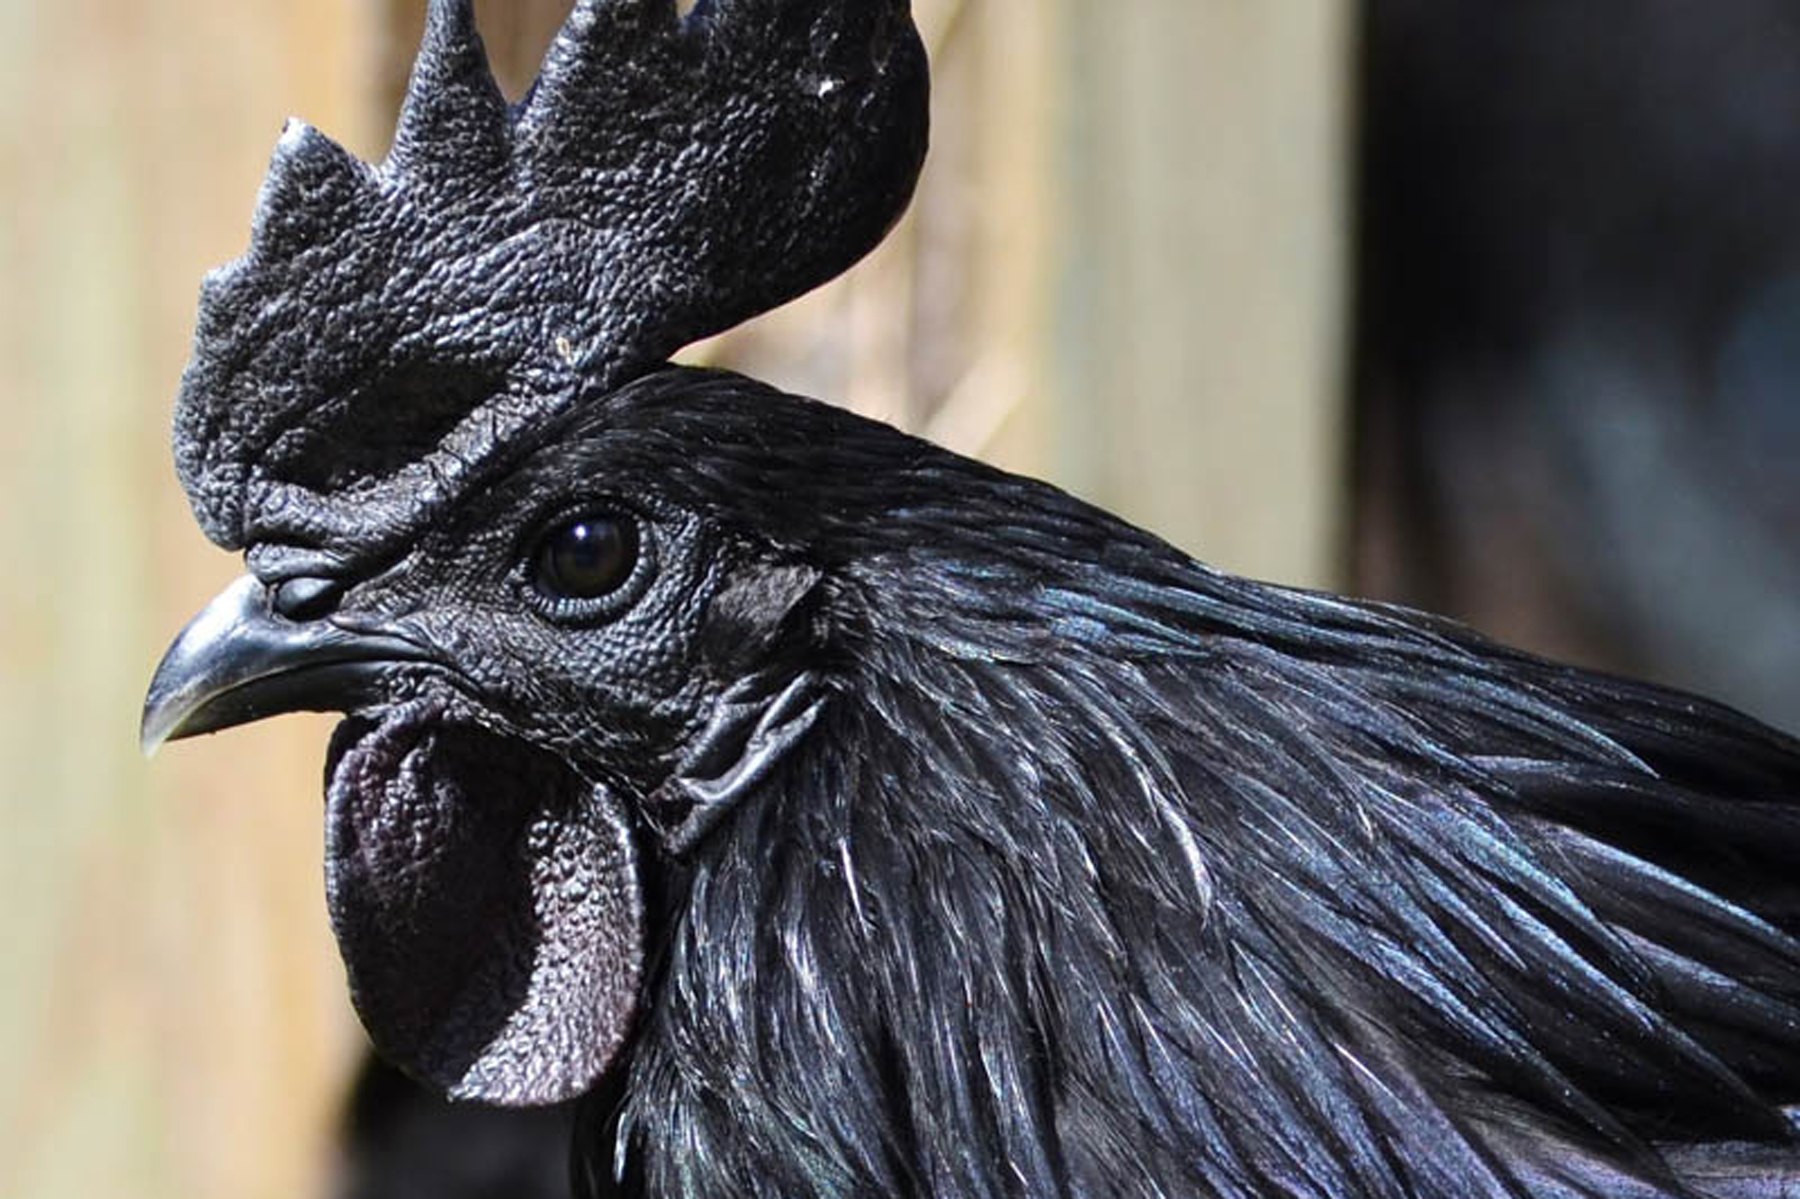 Indonesia S Jet Black Chickens Are The Dark Side Of Poultry Munchies